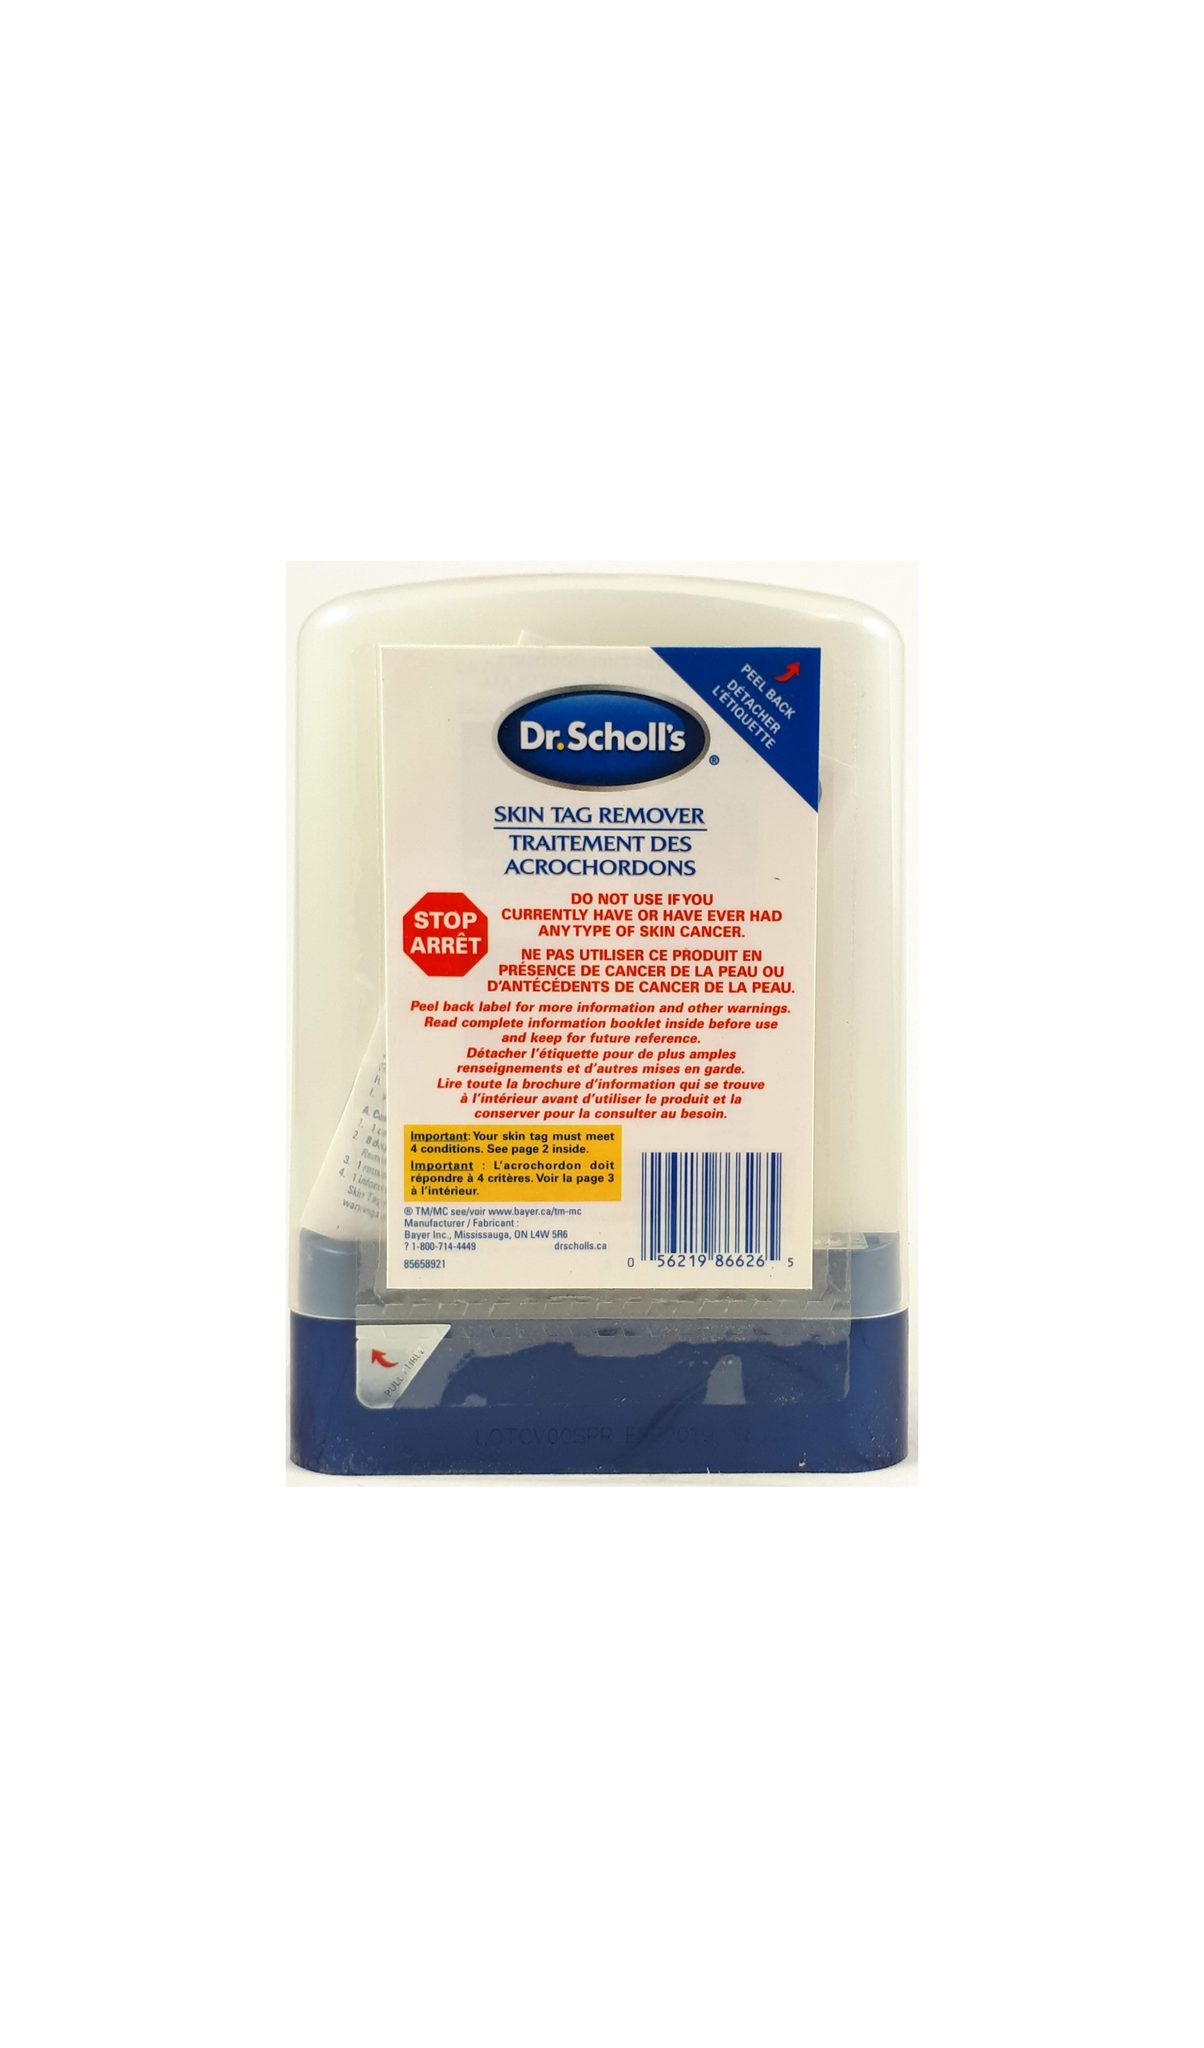 Dr. Scholl's Skin Tag Removal Kit, 8 treatments – Green Valley Pharmacy